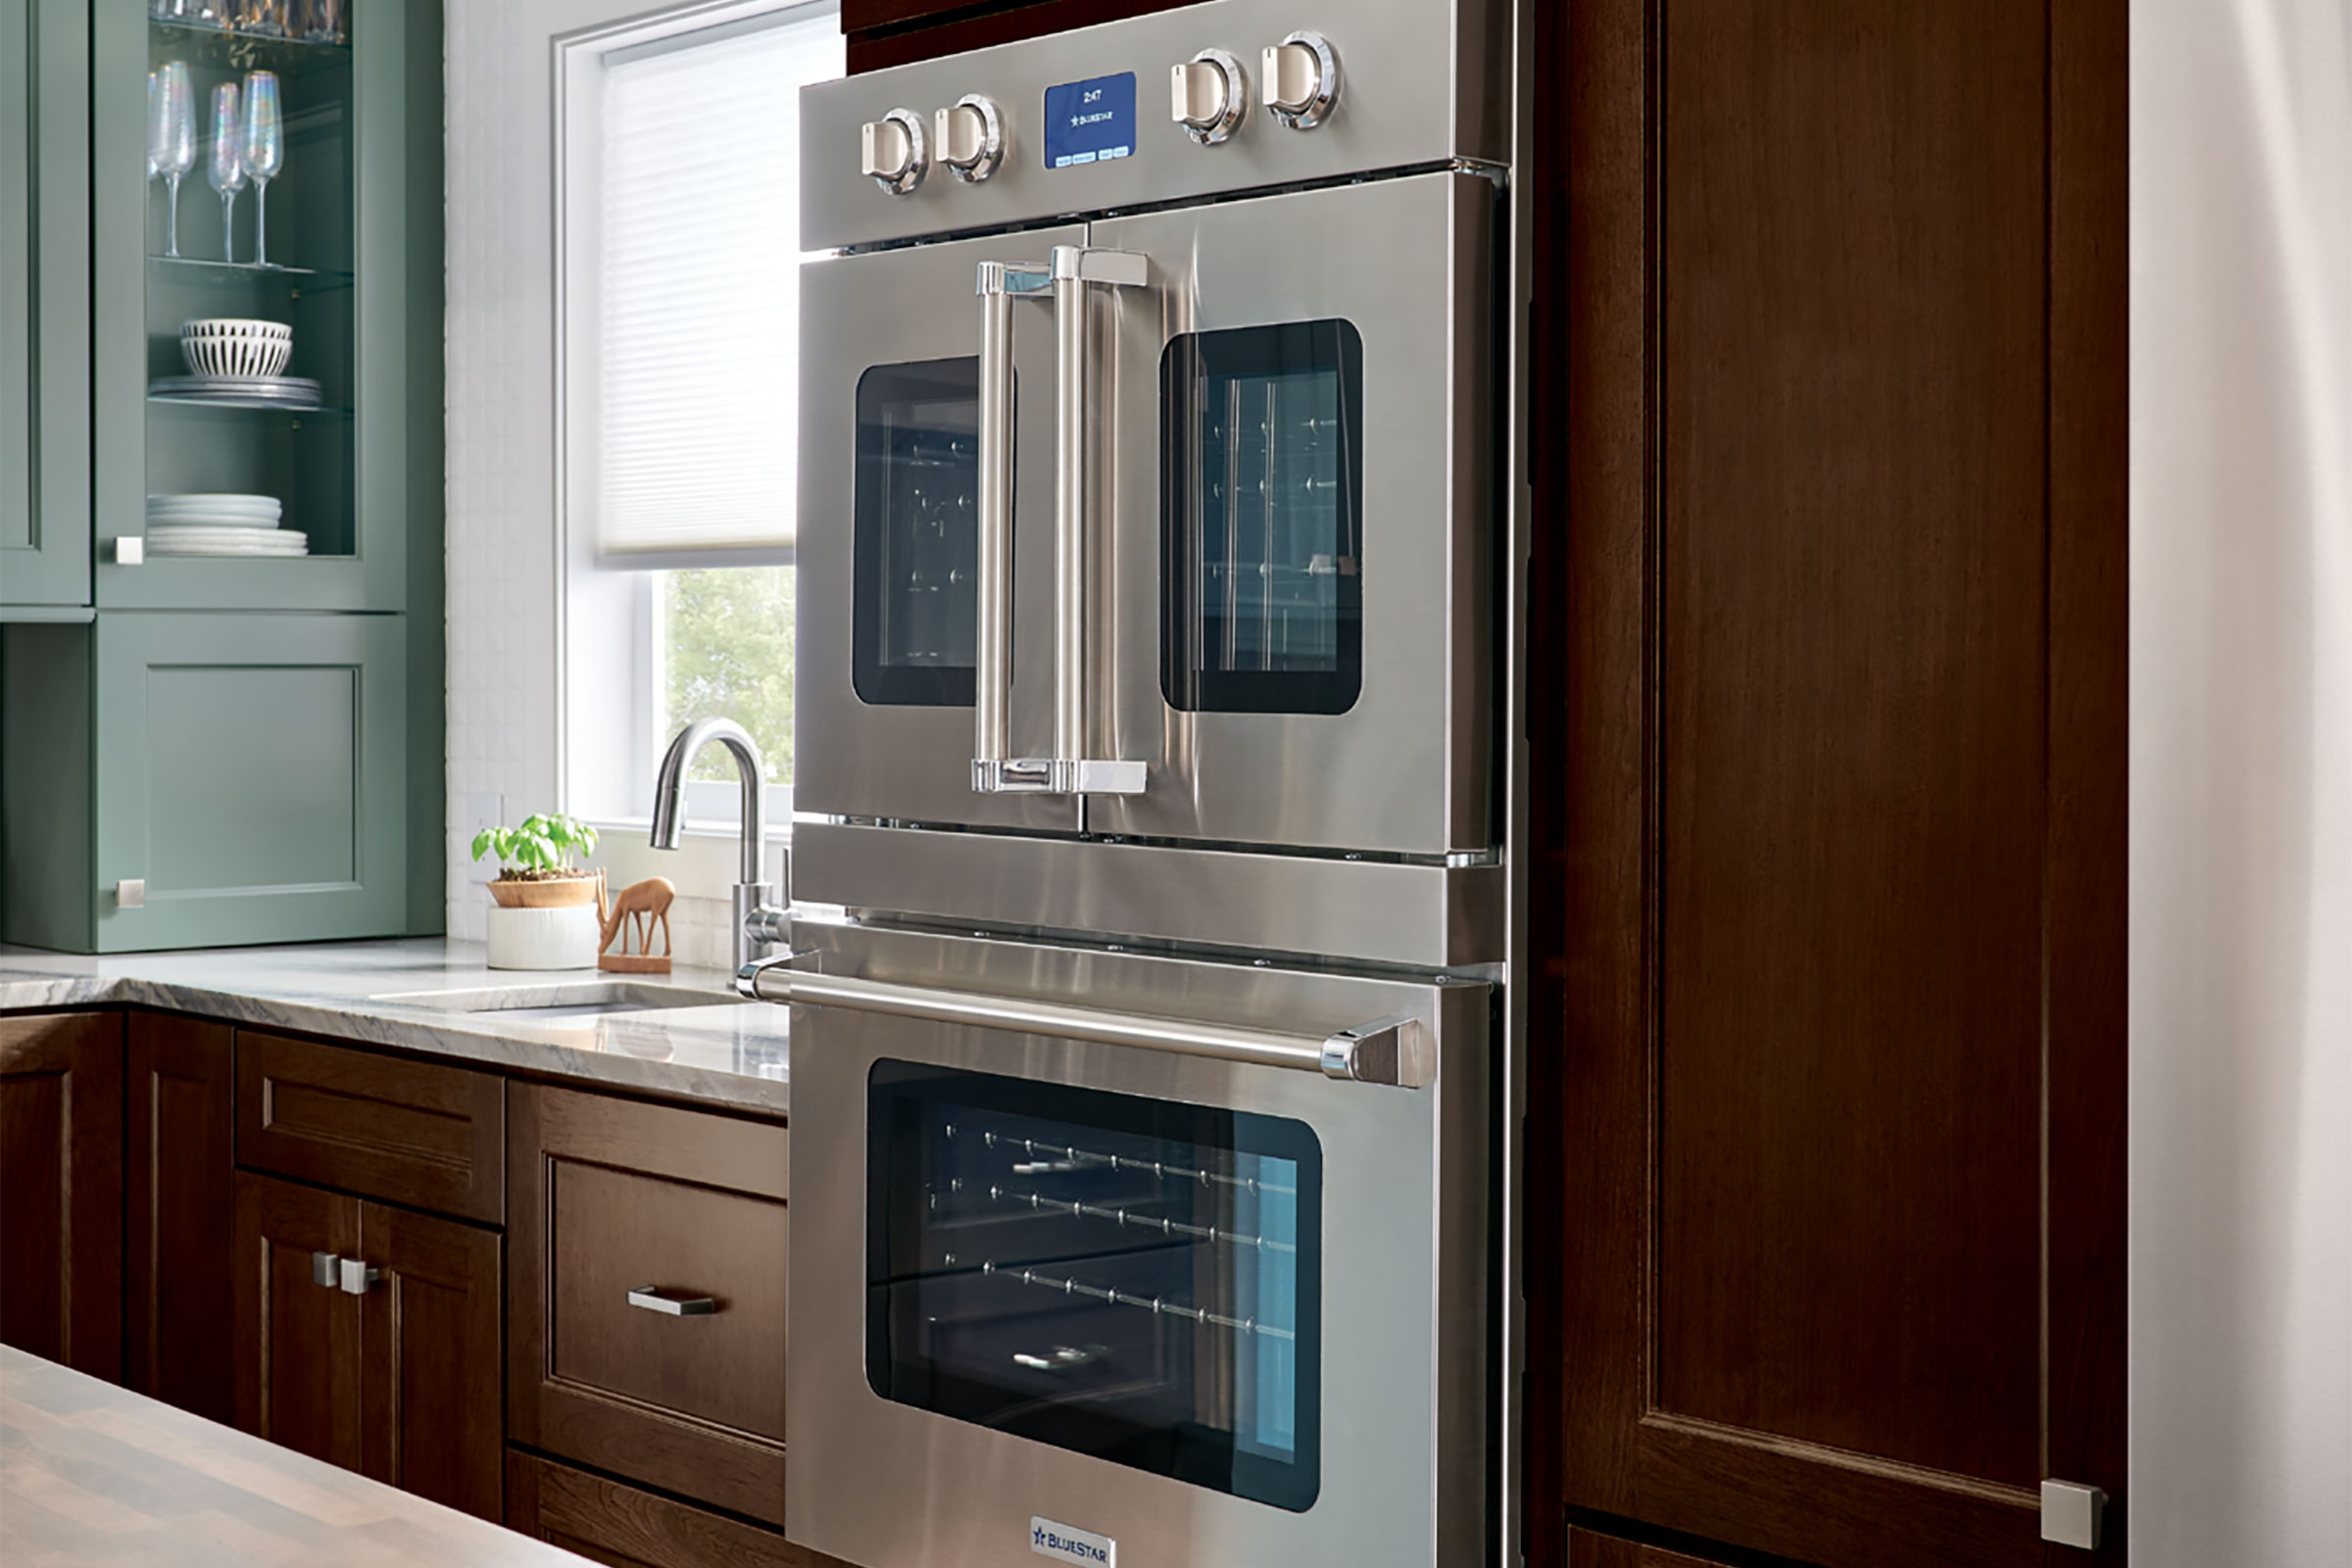 How to Select the Right Kitchen Appliances for Your Remodel